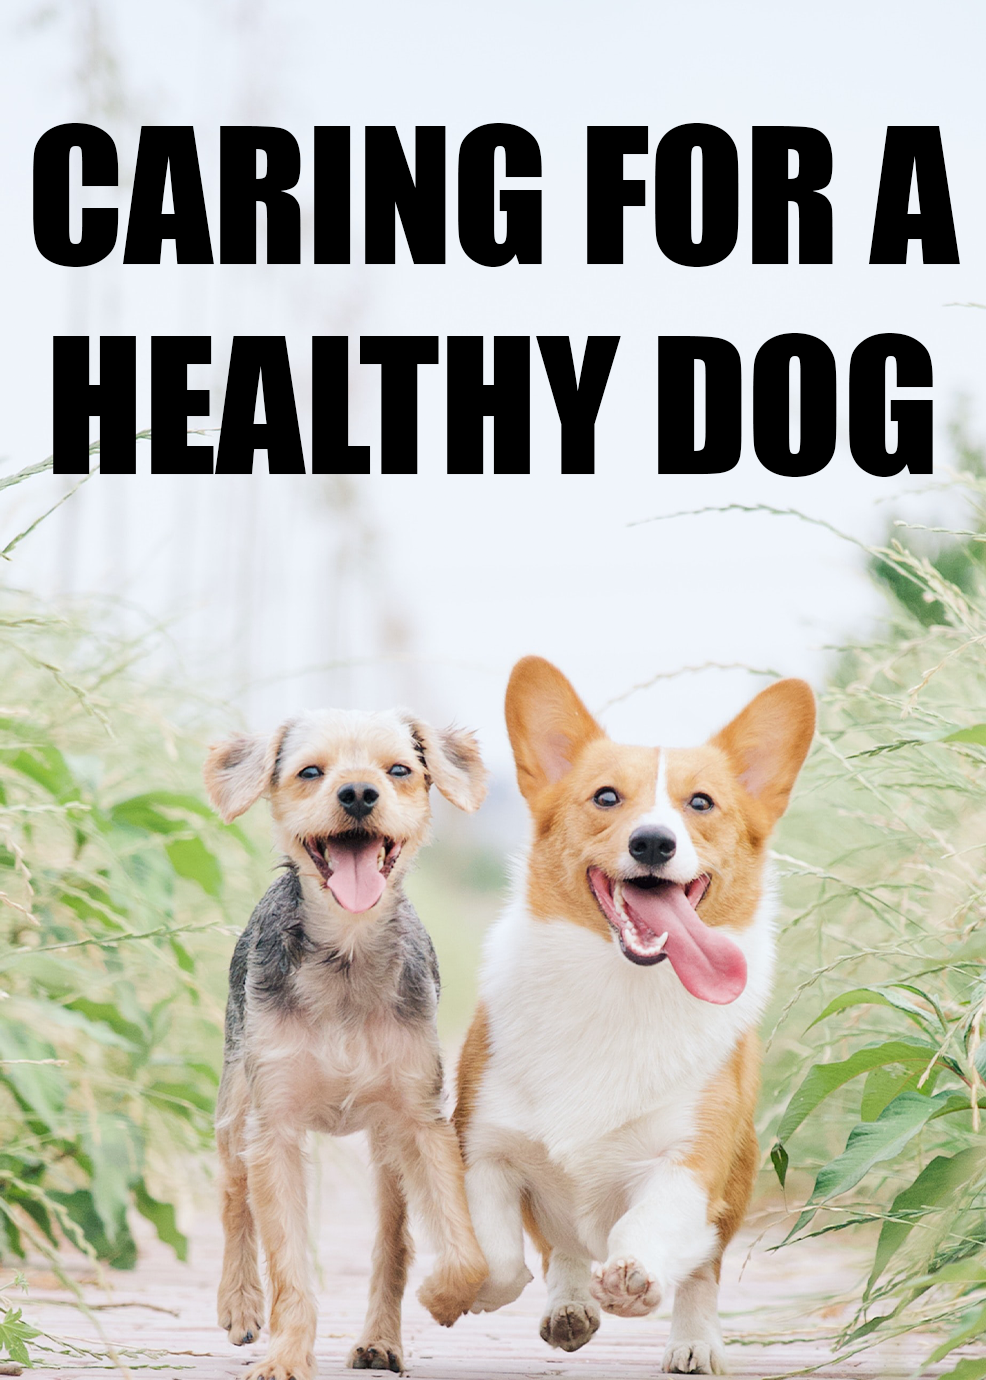 Caring For A Healthy Dog